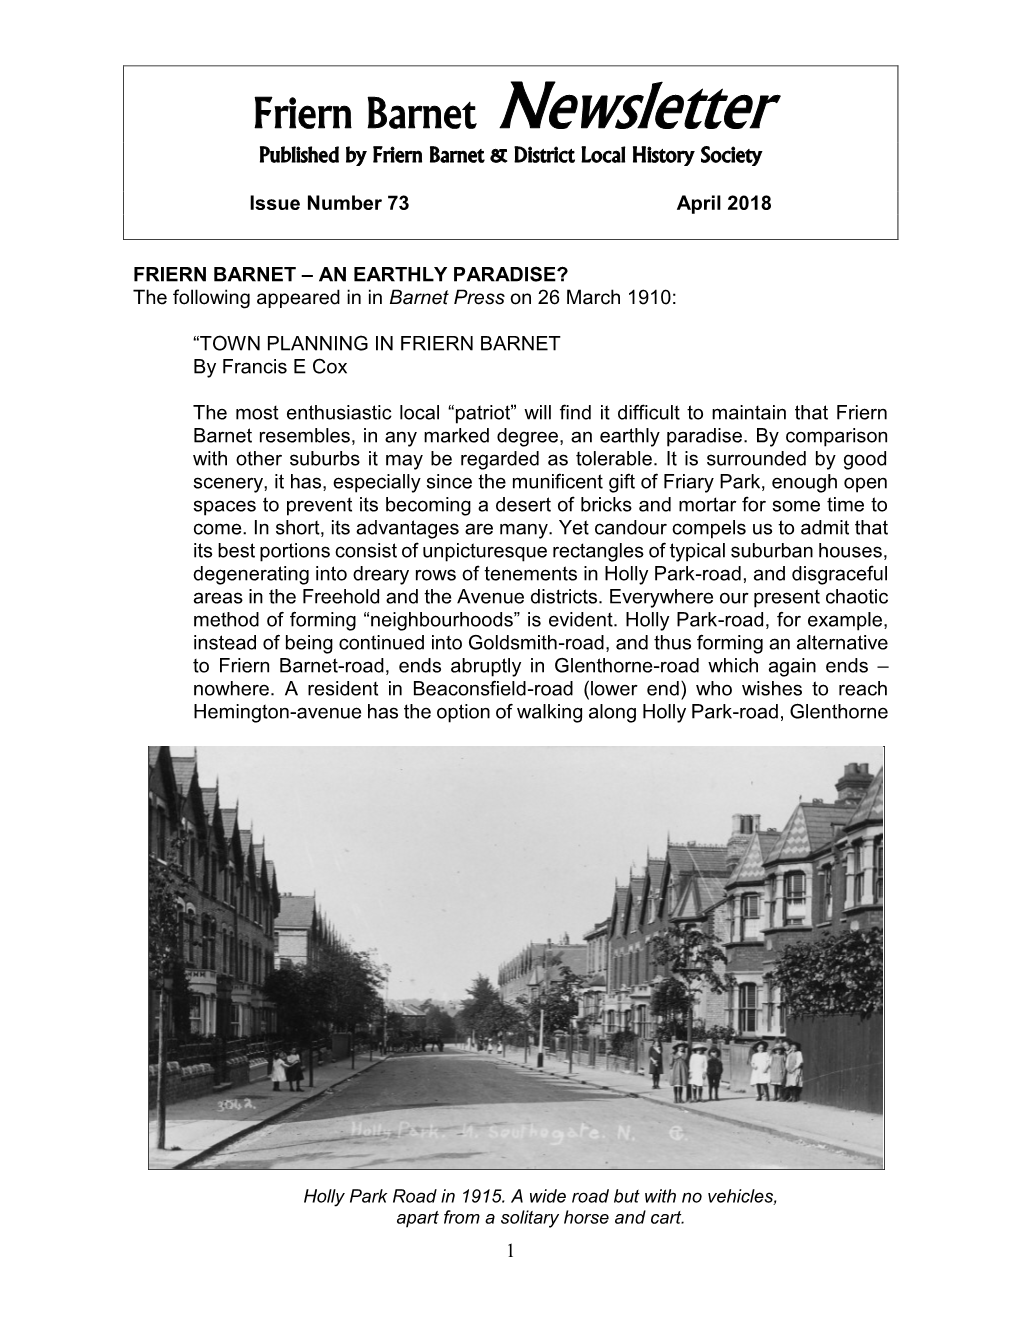 Friern Barnet Newsletter Published by Friern Barnet & District Local History Society